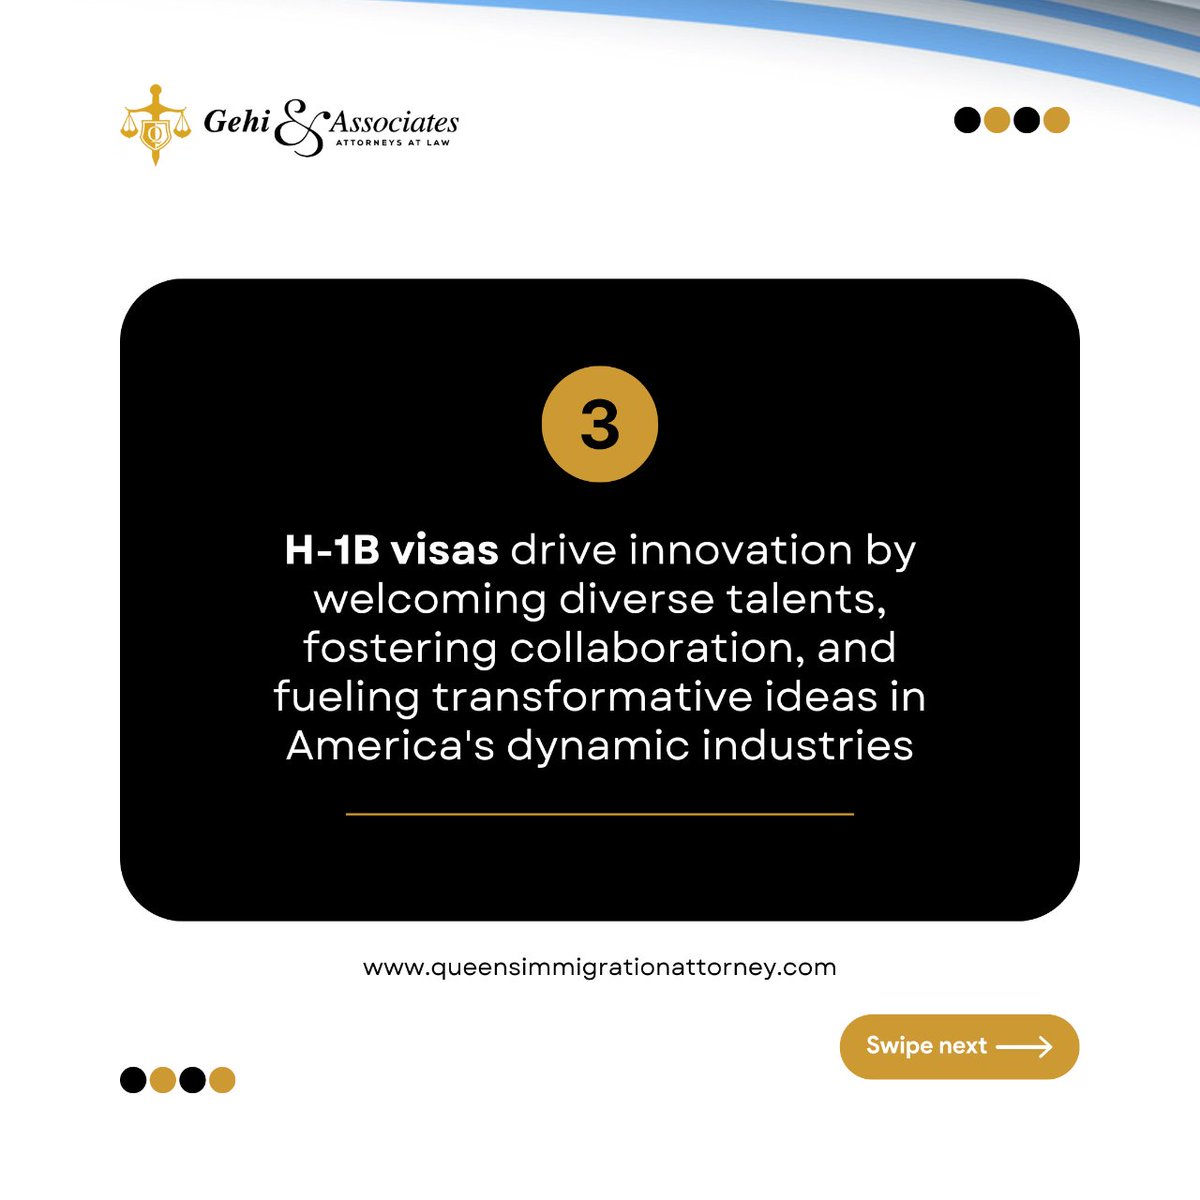 Advantages and opportunities that come with the H1-B visa into the USA.

To get started on your process, schedule a FREE CONSULTATION with us today. Visit queensimmigrationattorney.com

#uscis #queensimmigrationattorney # h1bvisa #immigrationprocess #usimmigration #greencard #visa